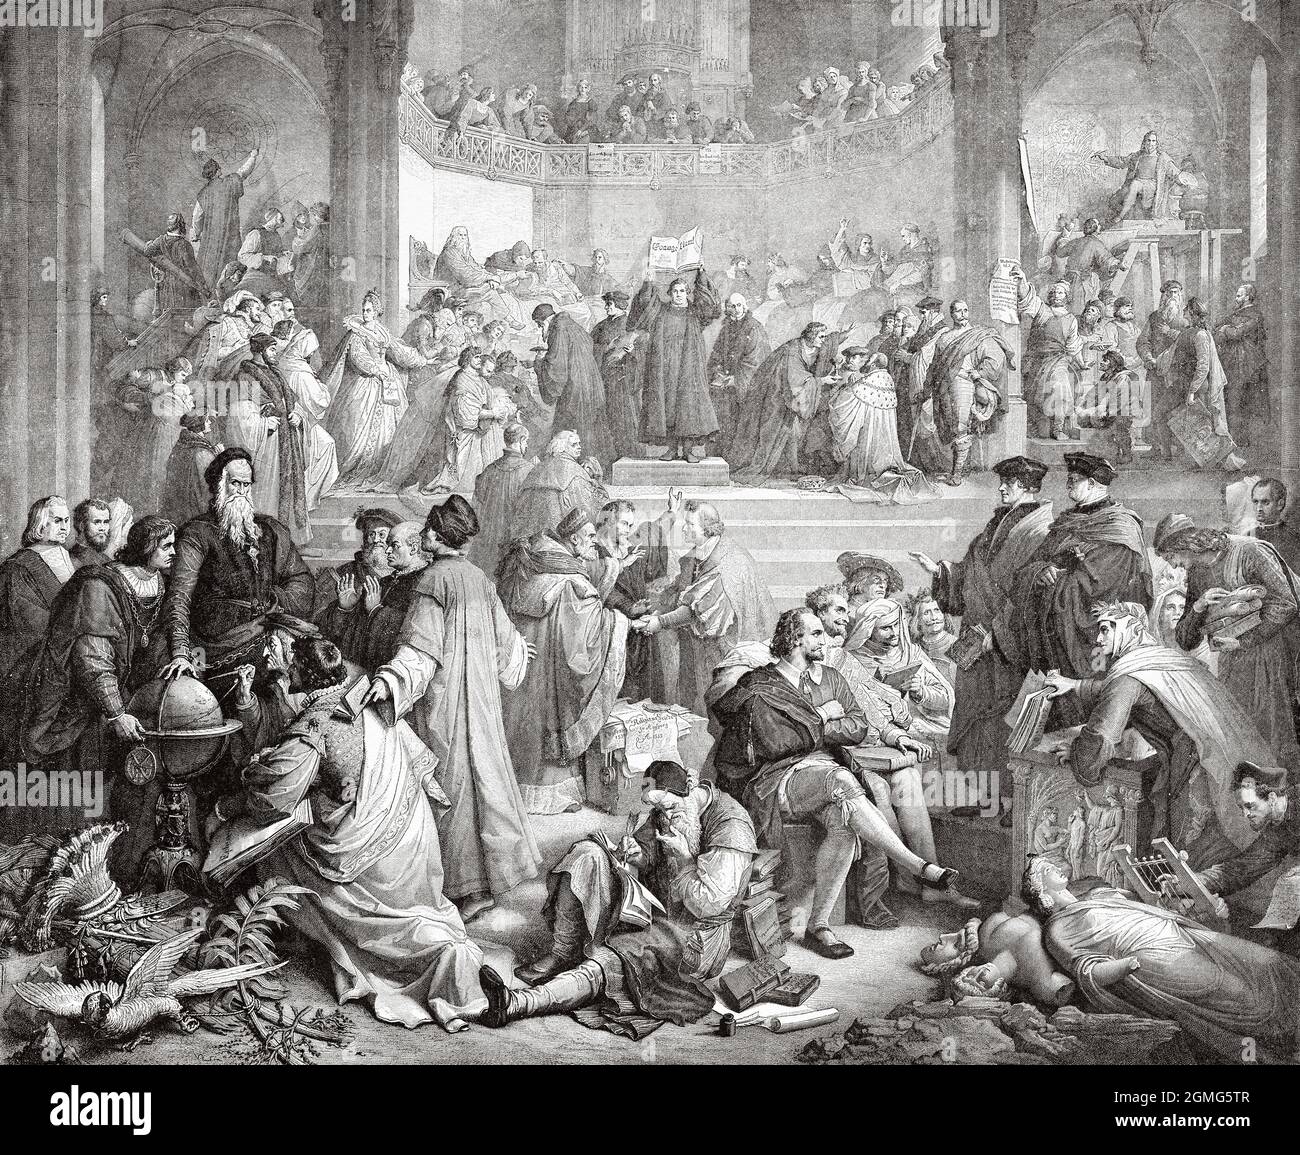 The Protestant Reformation, painting by Wilhelm von Kaulbach (1805-1874) was a German painter. Old 19th century engraved illustration from La Ilustración Artística 1882 Stock Photo